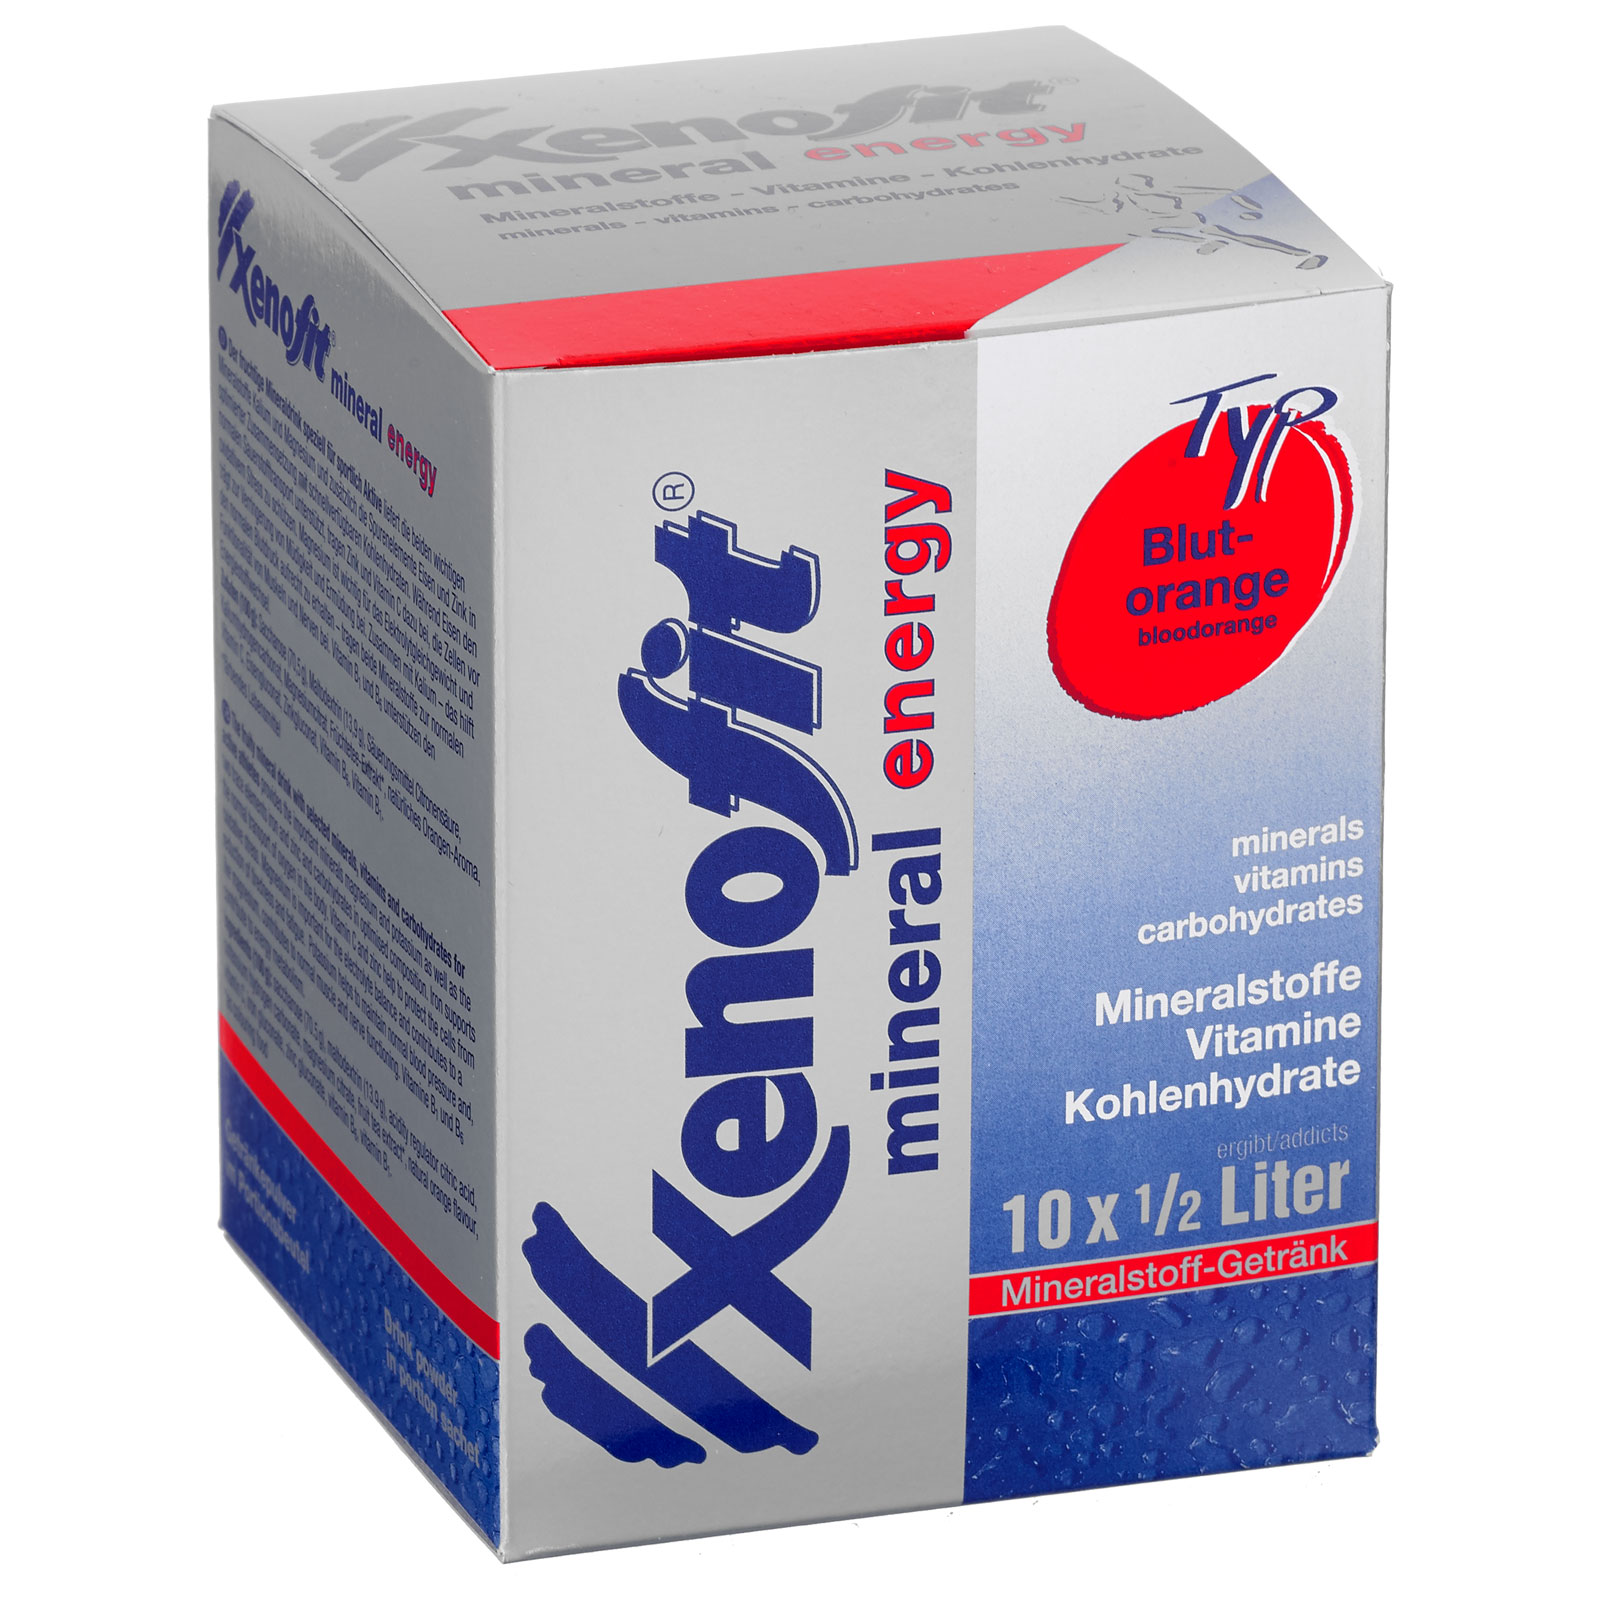 Image of Xenofit Mineral Energy Drink with Carbohydrates - 10x36g